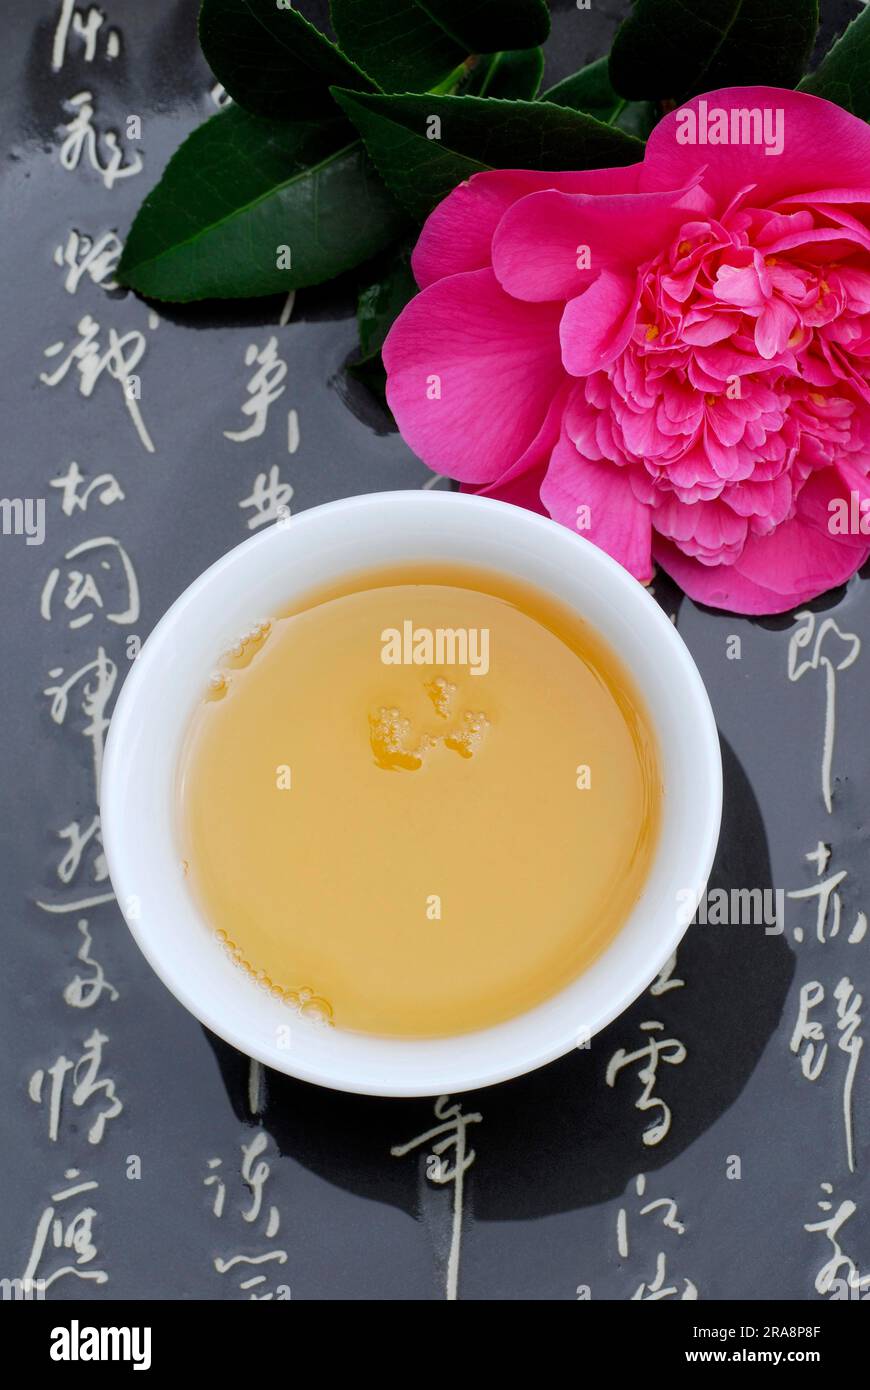 Cup with tea, camellia blossom and japanese characters (Theaceae), camellia Stock Photo